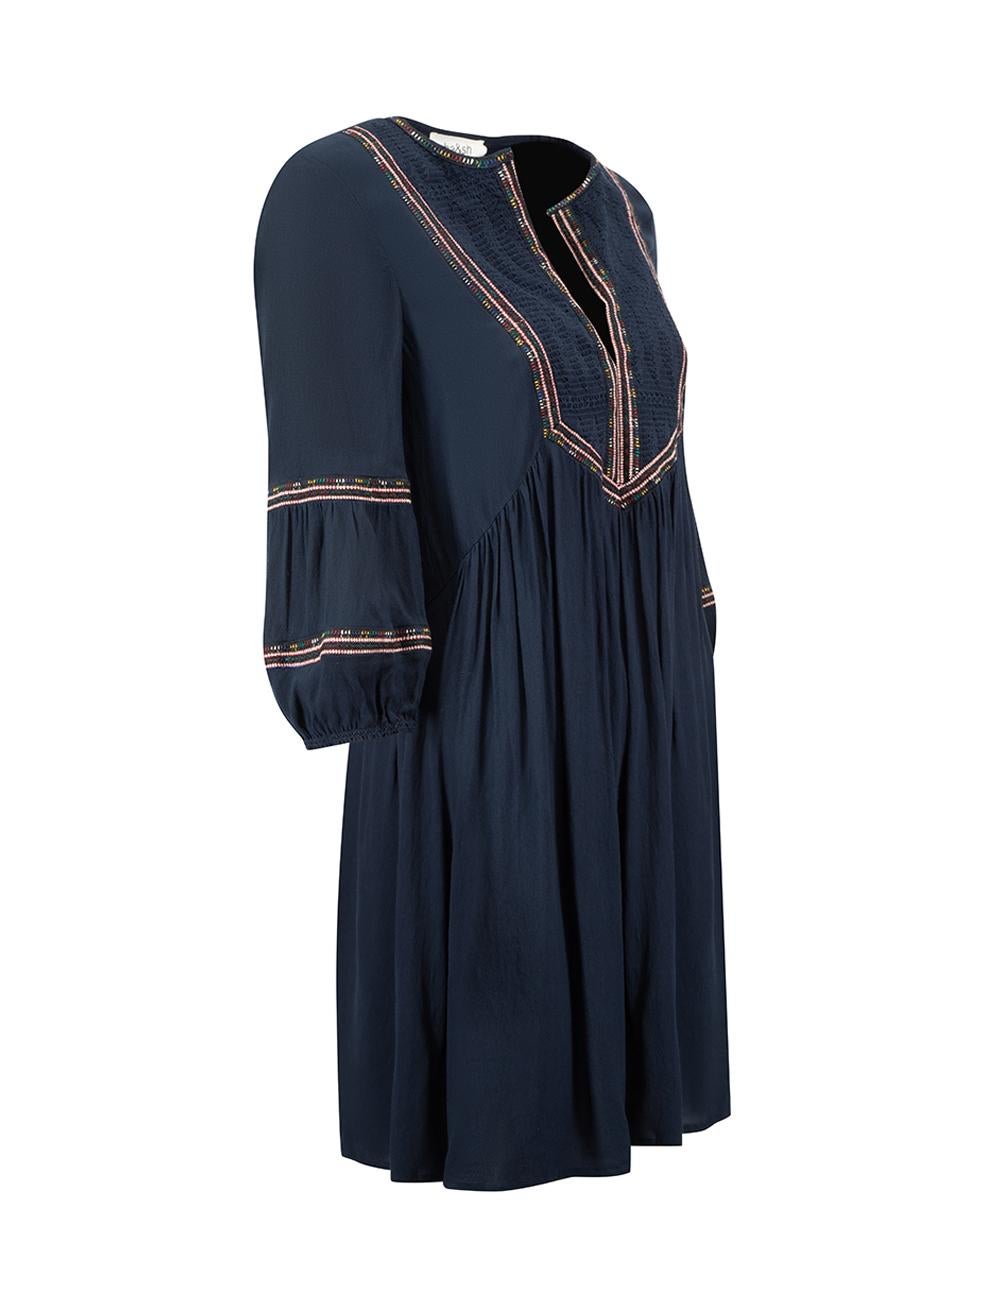 CONDITION is Very good. Hardly any visible wear to dress is evident on this used ba&sh designer resale item.

Details
Navy
Viscose
Mini dress
V neckline
Embroidered detail
Mid length sleeves
Elasticated cuffs
Made in China 

Composition
100%